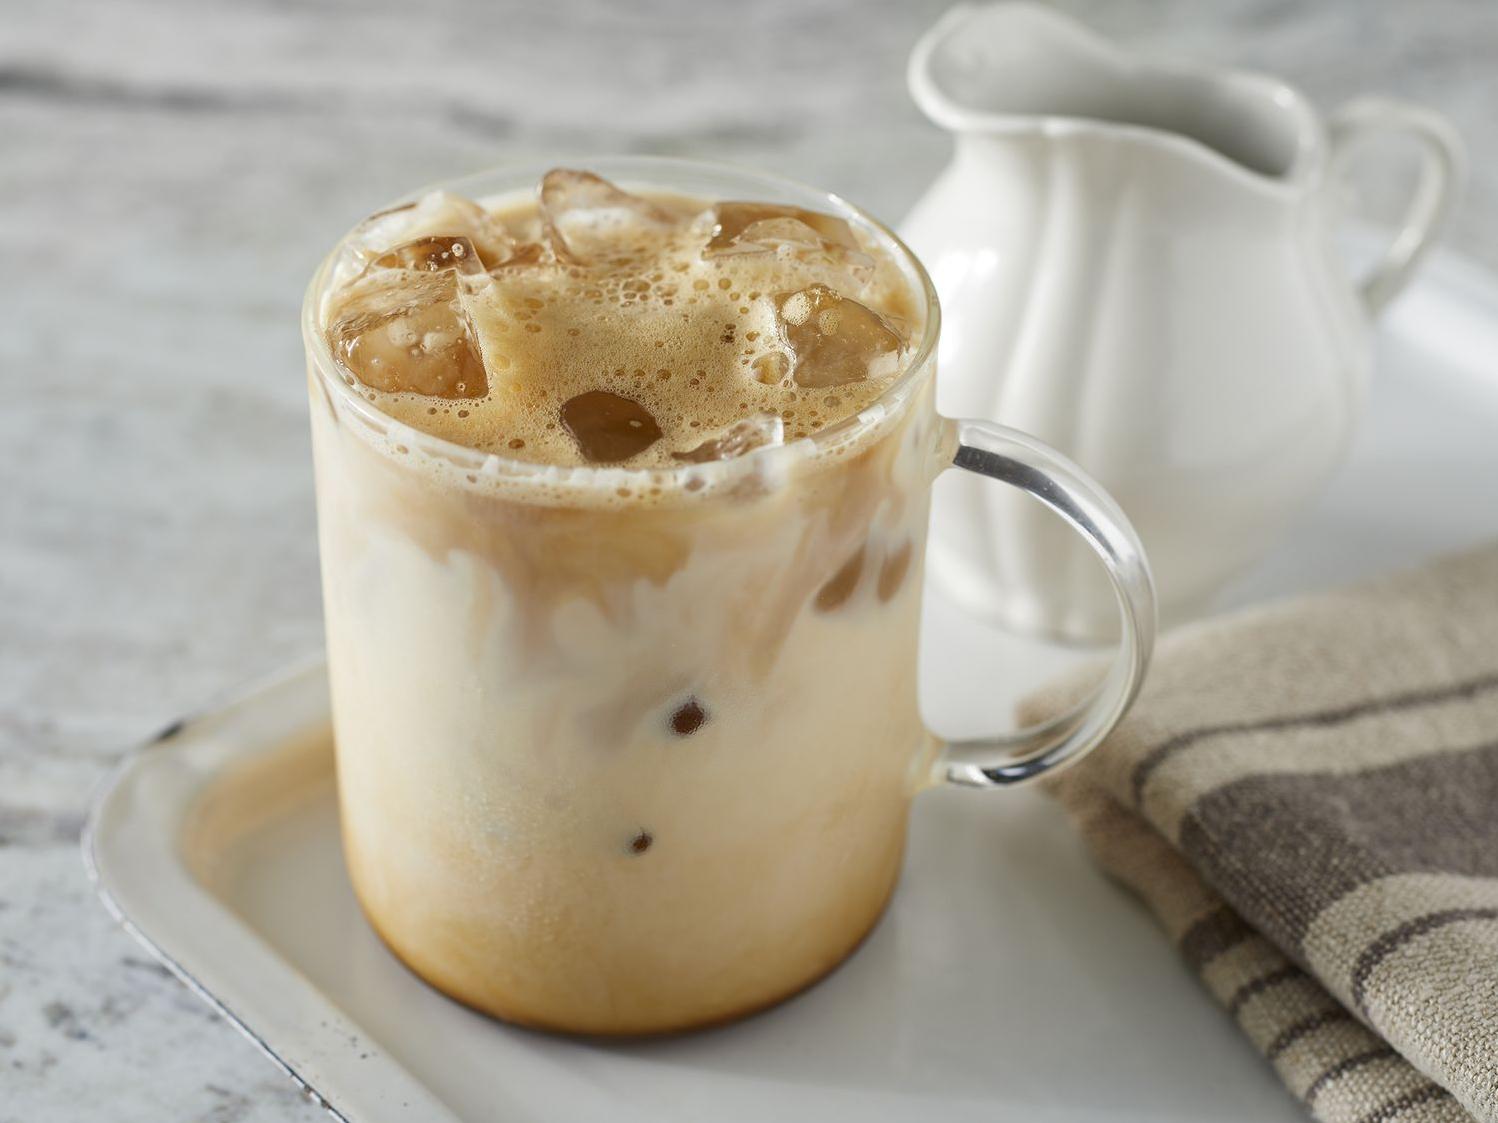  Cool down this summer with an iced coffee that's easy to make at home!